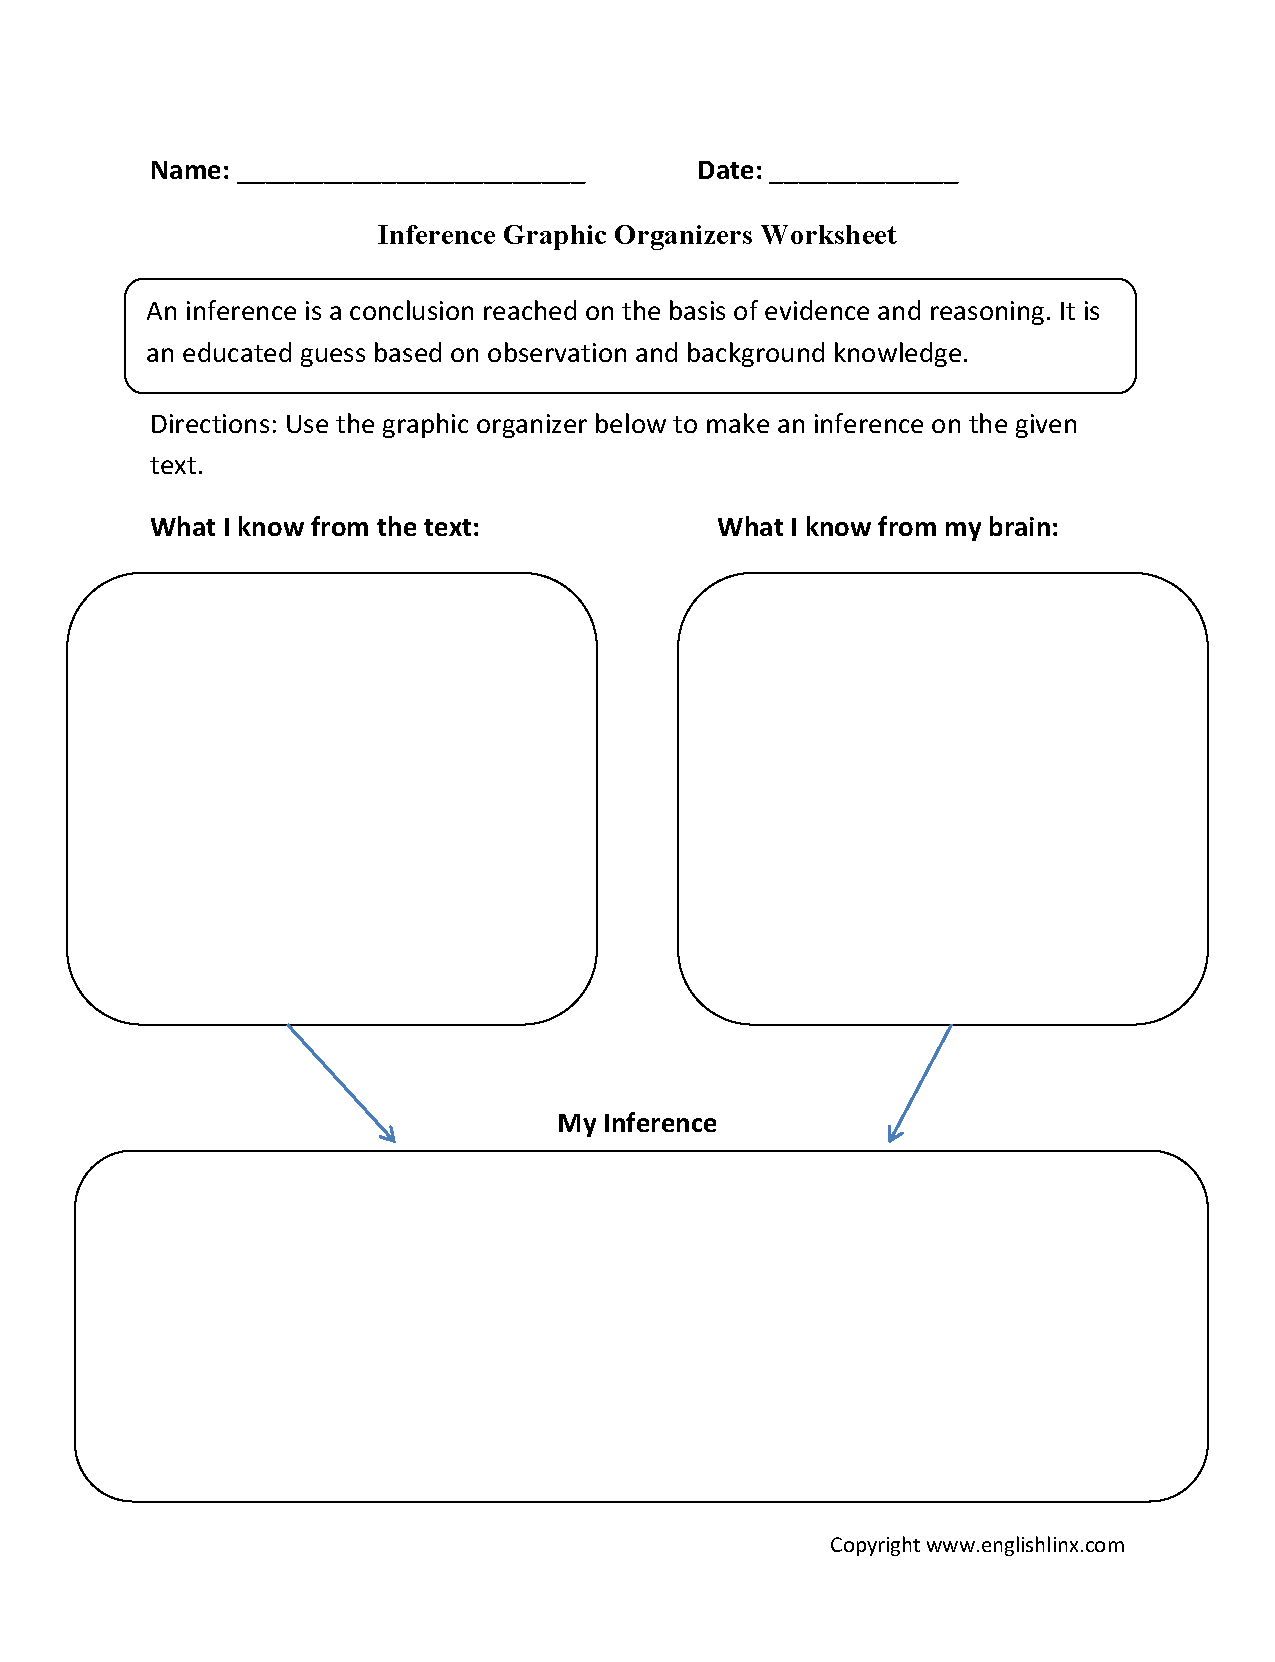 15 Best Images of Poetry Structure Worksheet - 7th Grade Poem